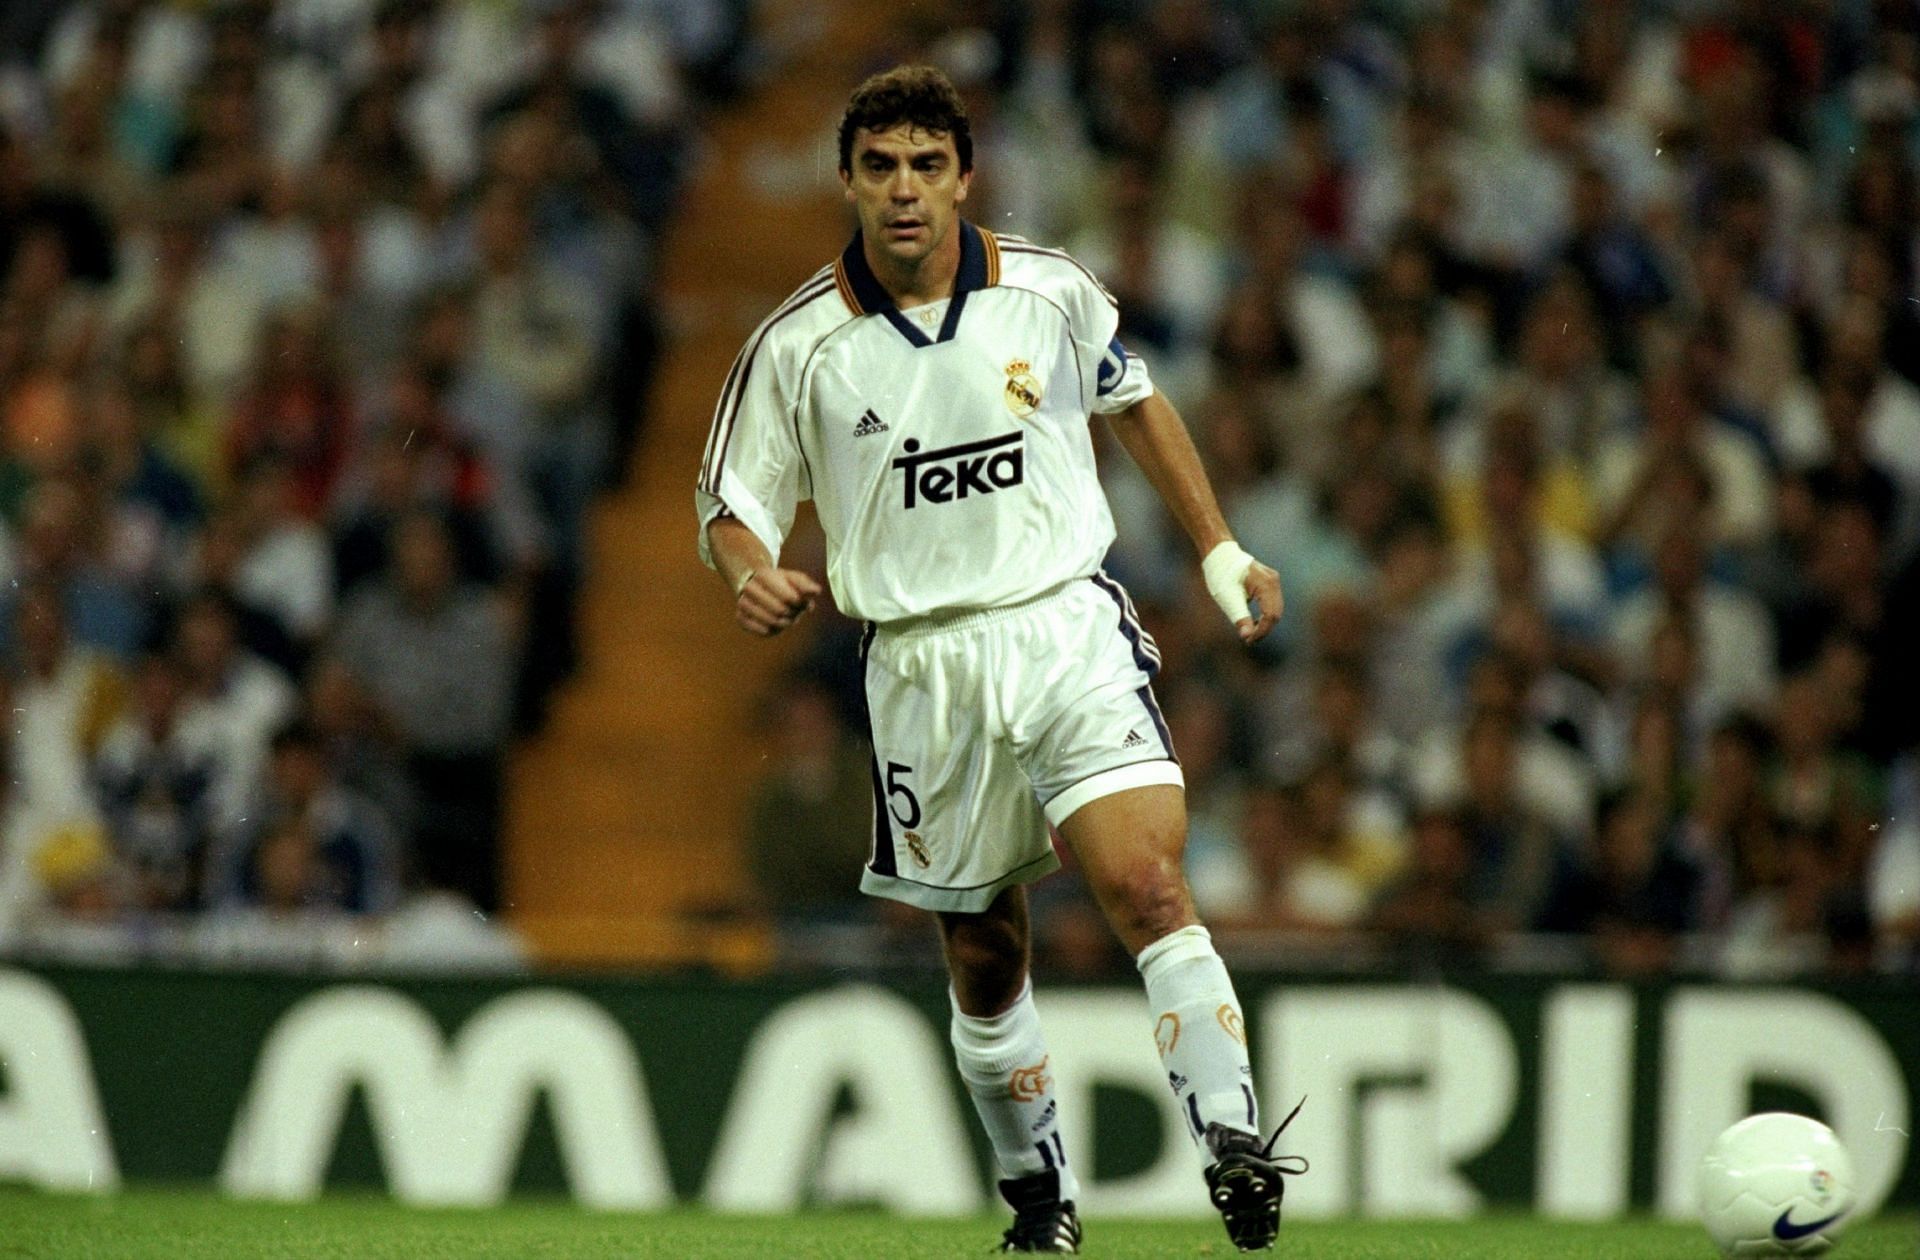 Manolo Sanchis in action at the El Clasico